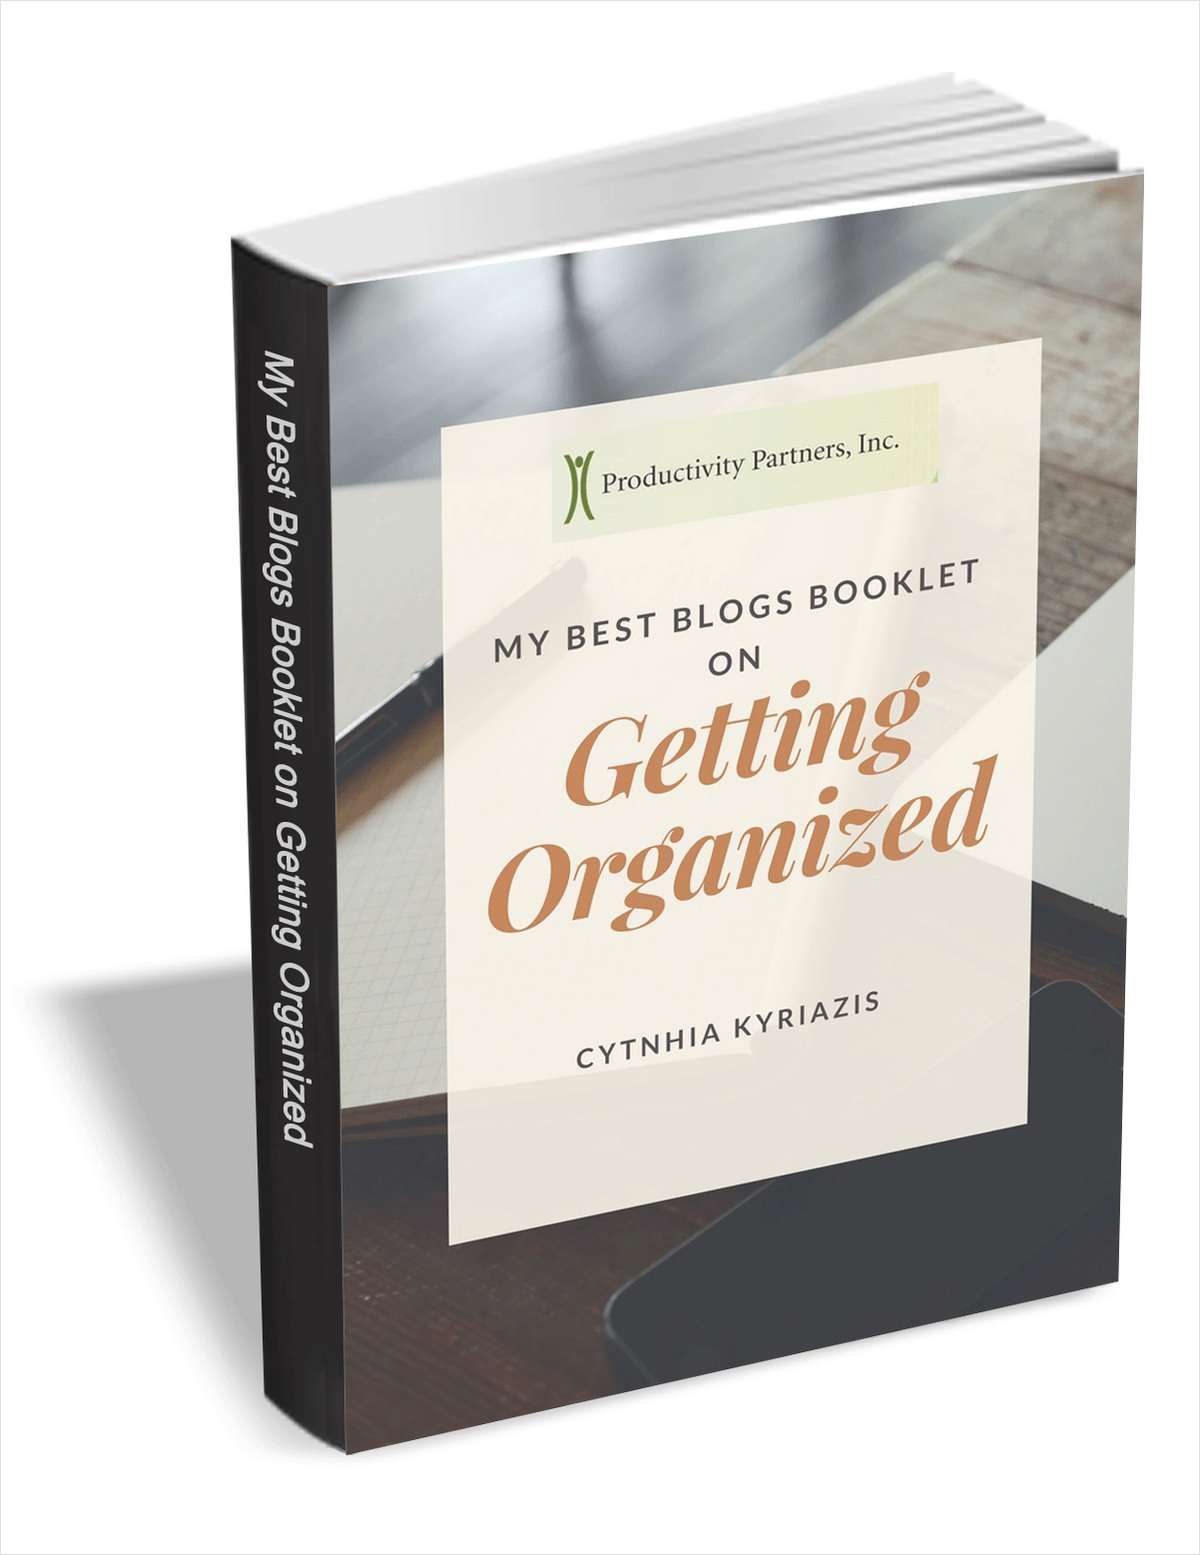 My Best Blogs Booklet on Getting Organized